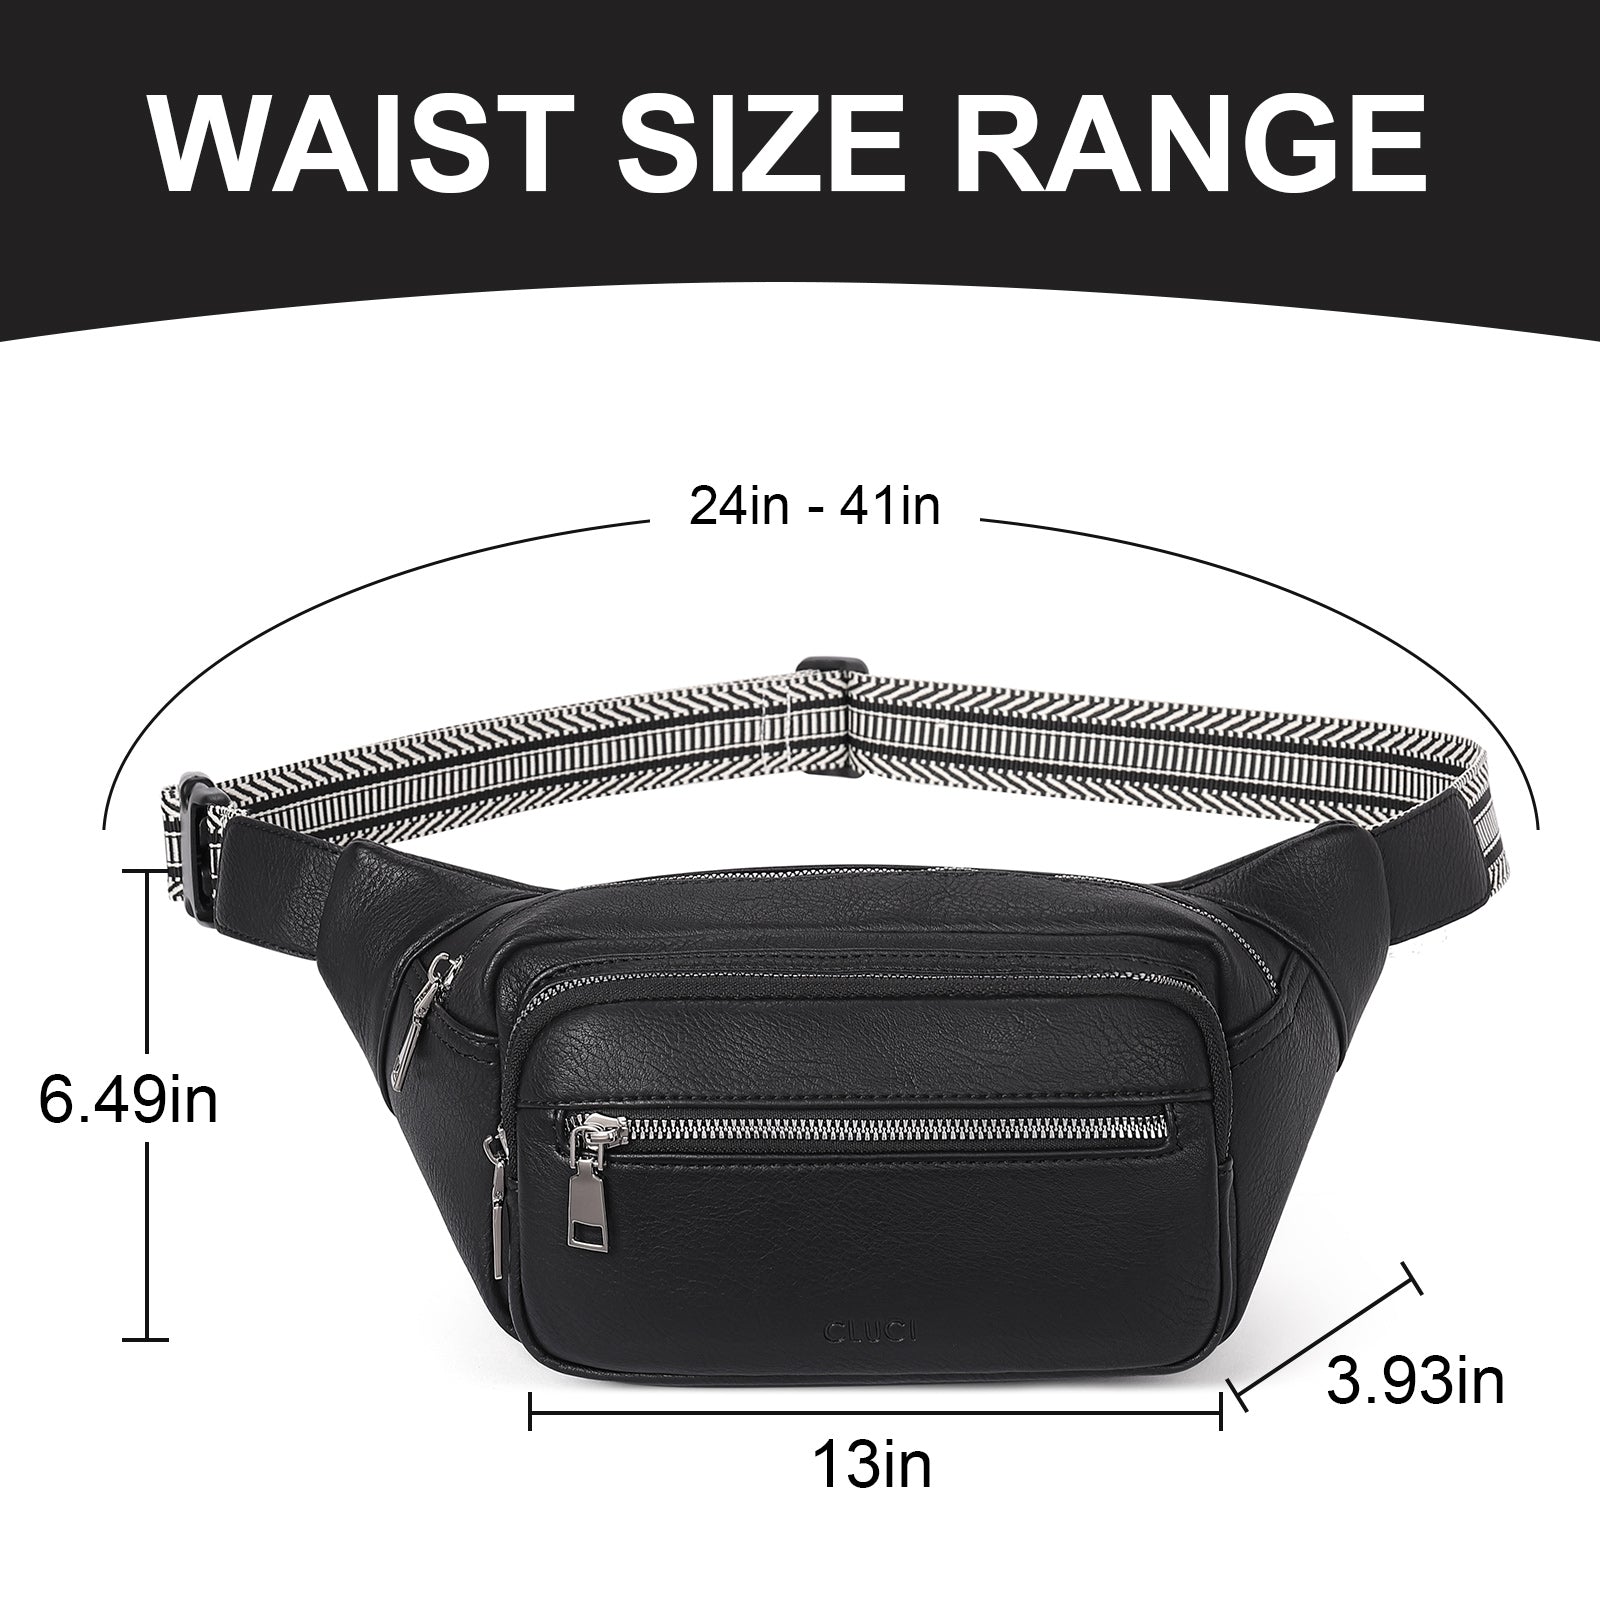 CLUCI Trendy Fanny Belt Sling Bag Crossbody Purse for Travel, Outdoors, Gym and Workouts